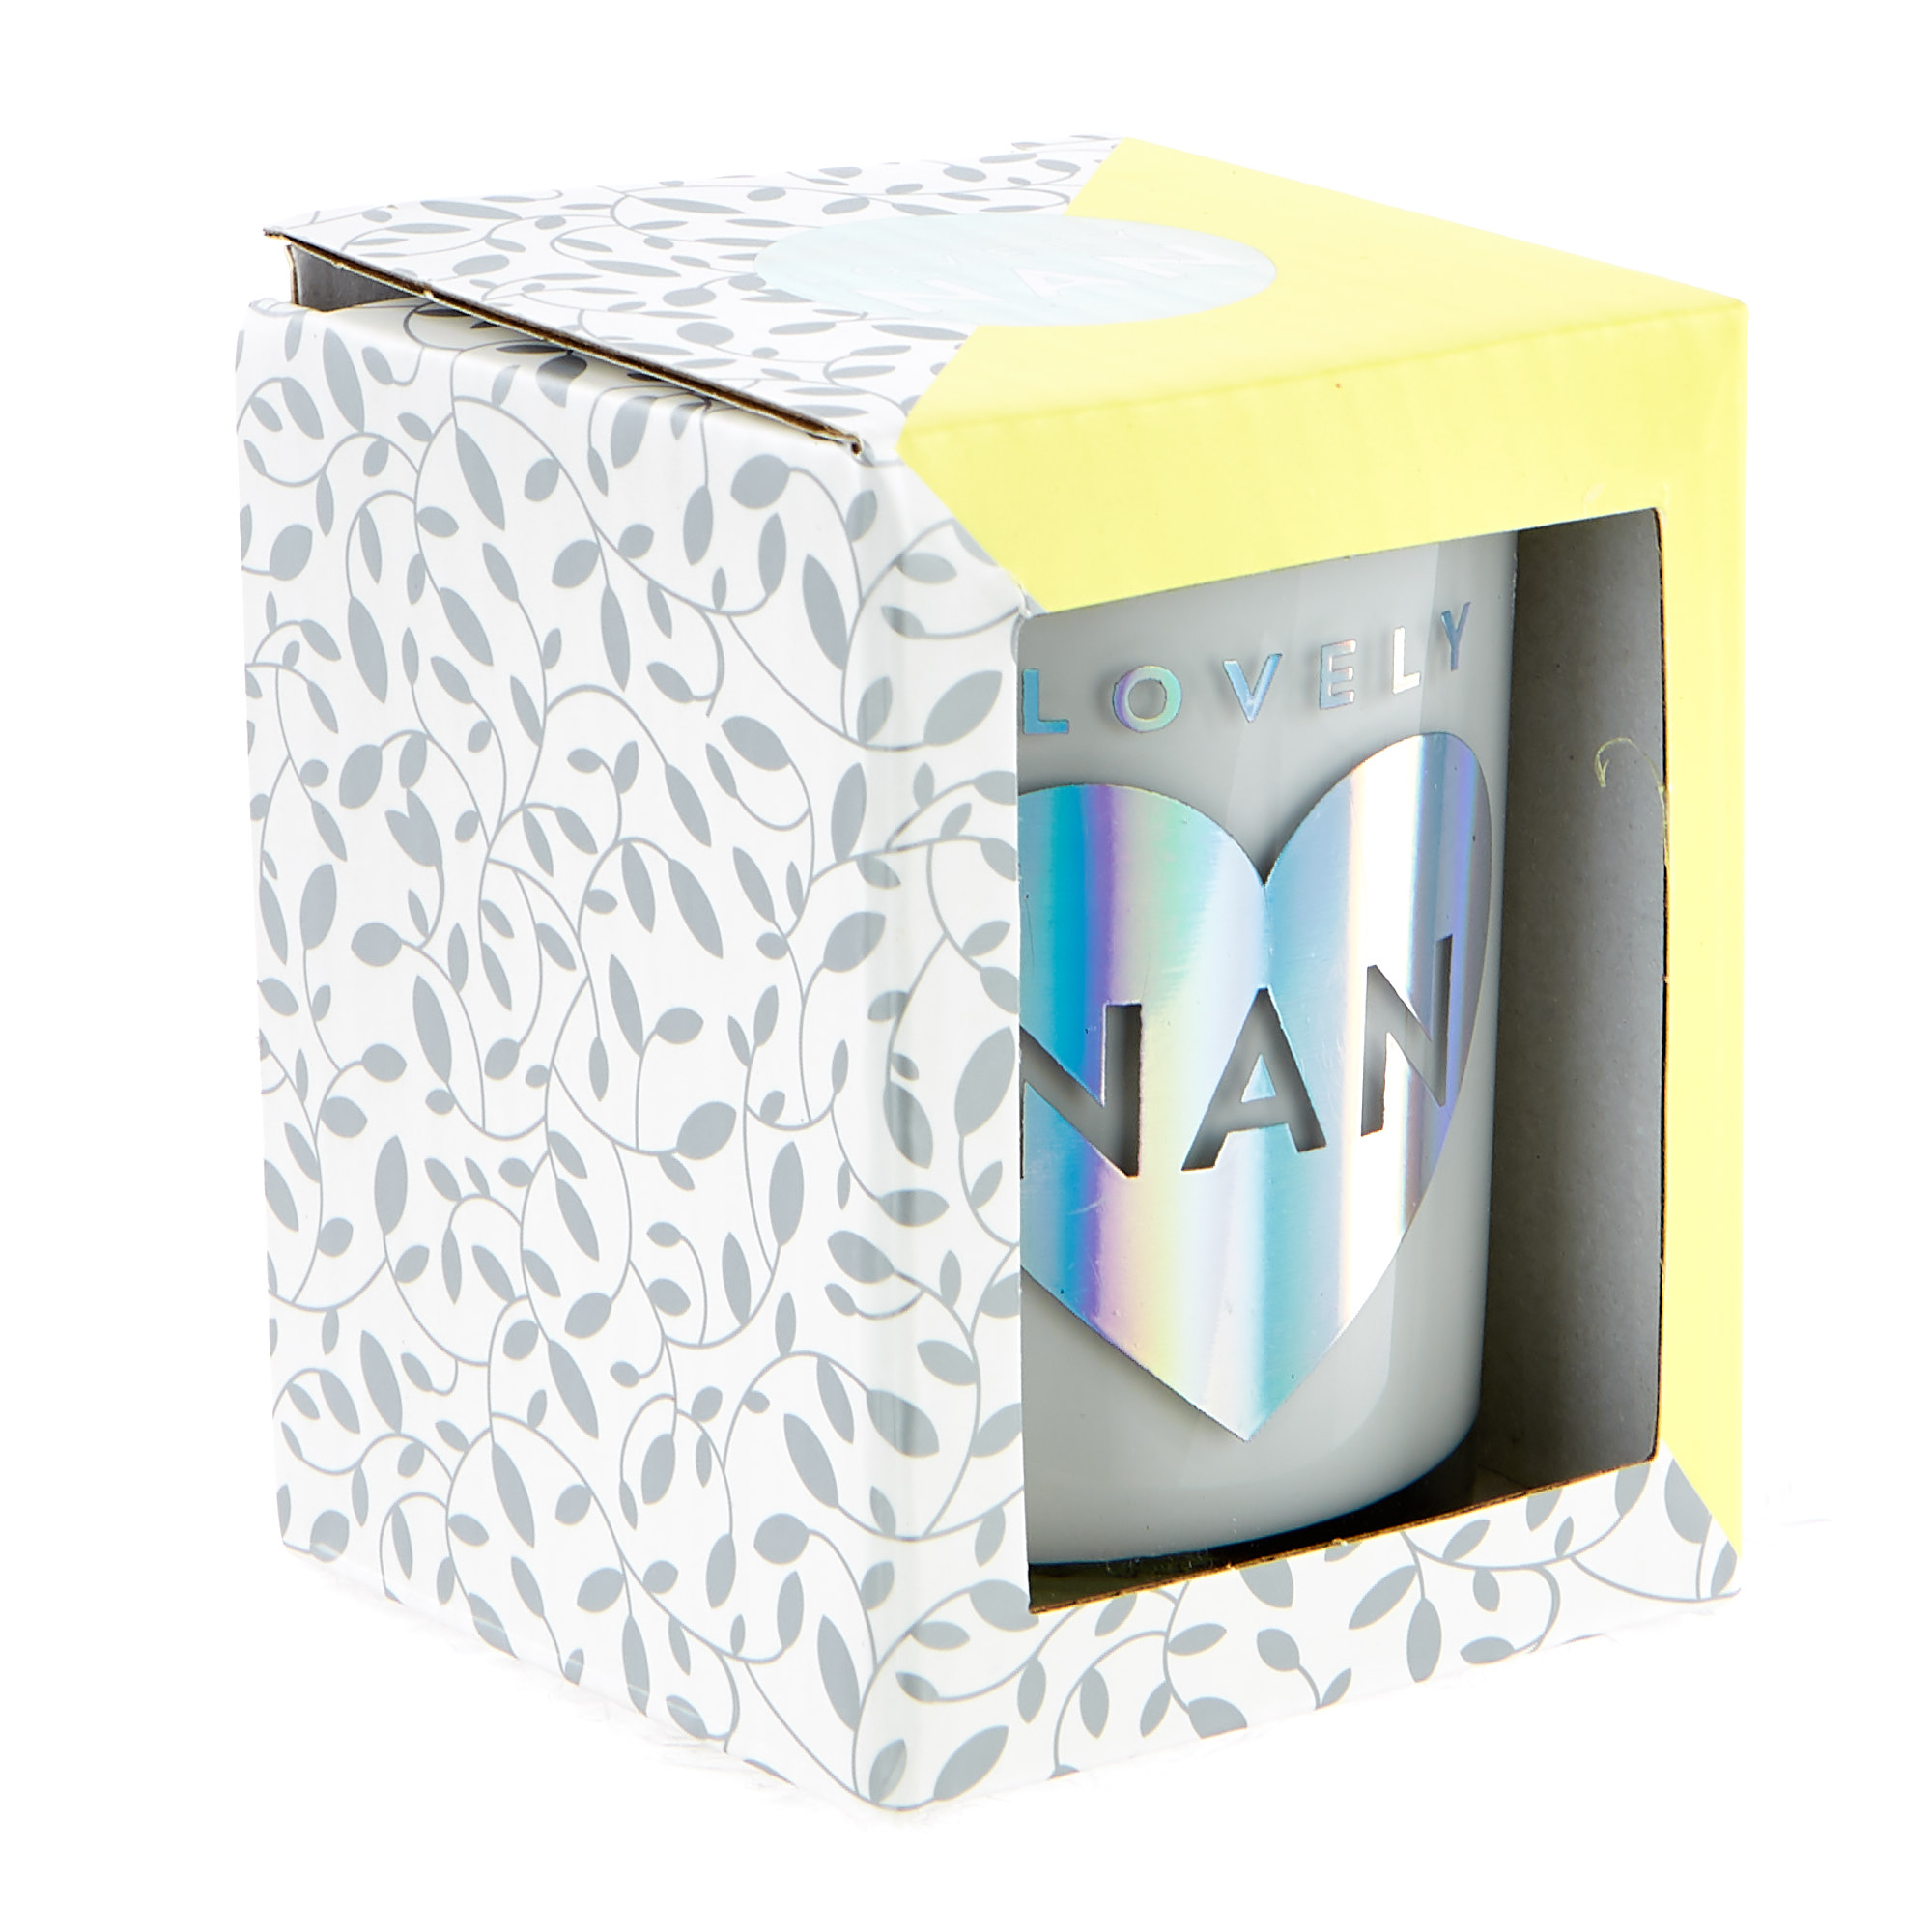 Lovely Nan Vanilla Scented Candle